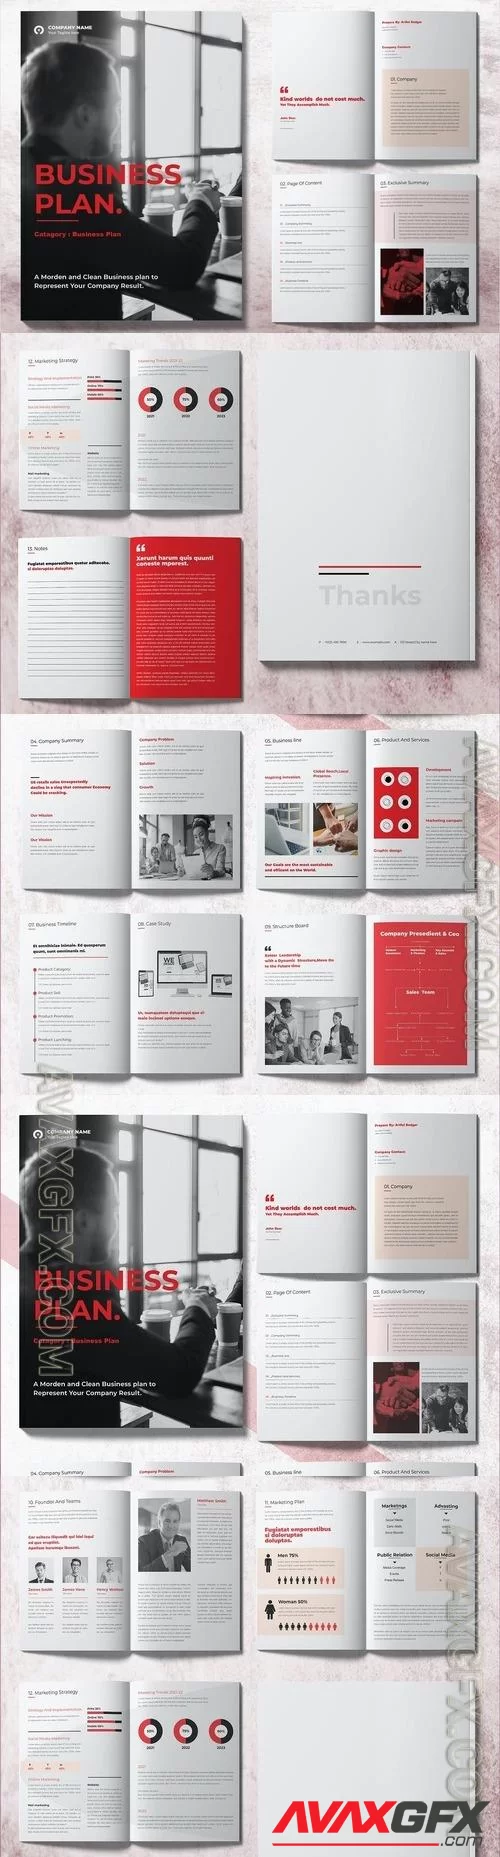 Business Plan Design Template WRQFL7M [INDD]